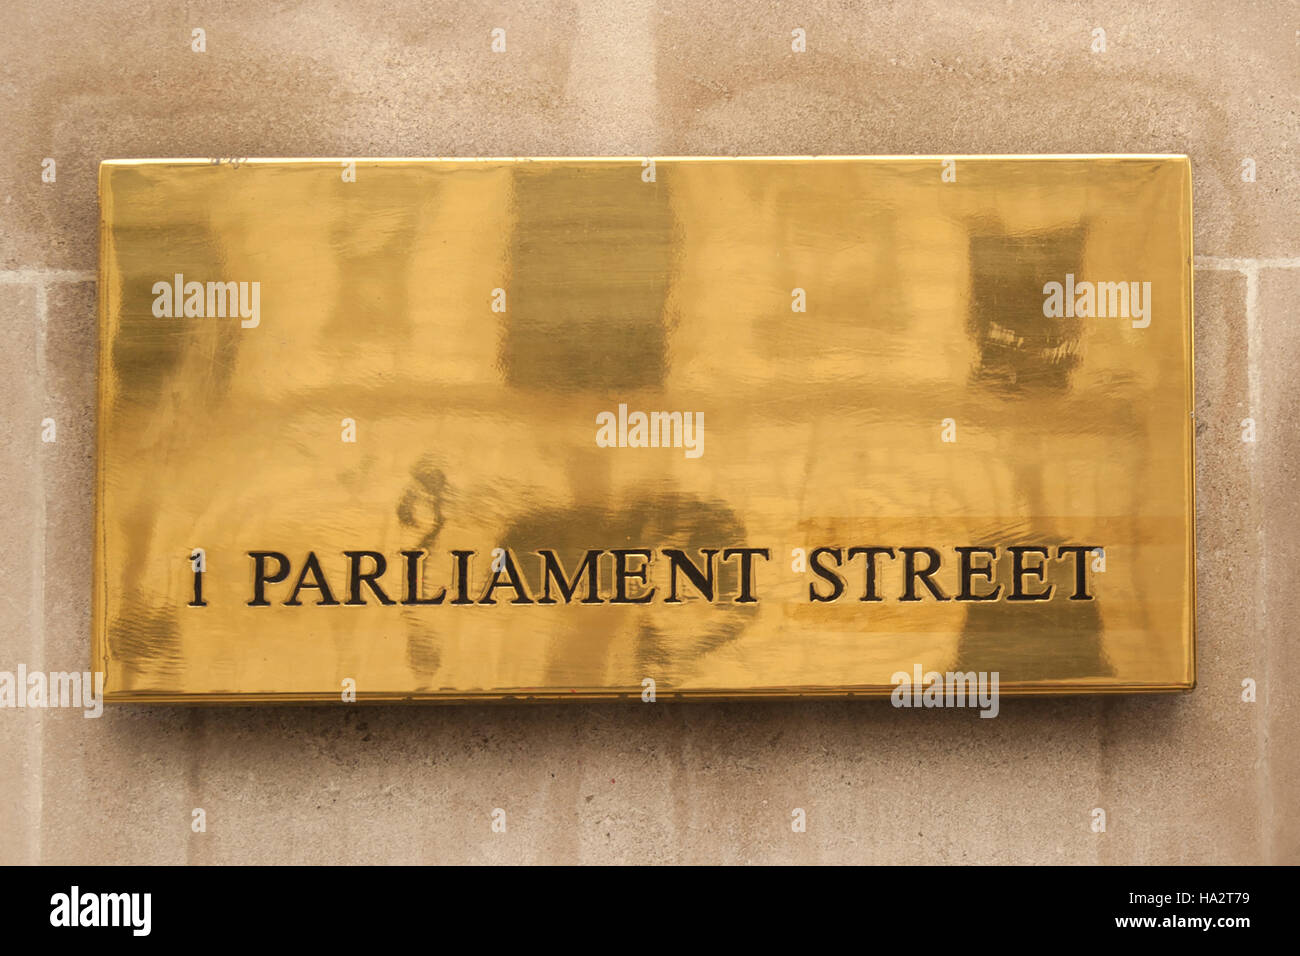 The address of 1 Parliament Street, on a metal plaque on the road side, London UK, October 2013 Stock Photo